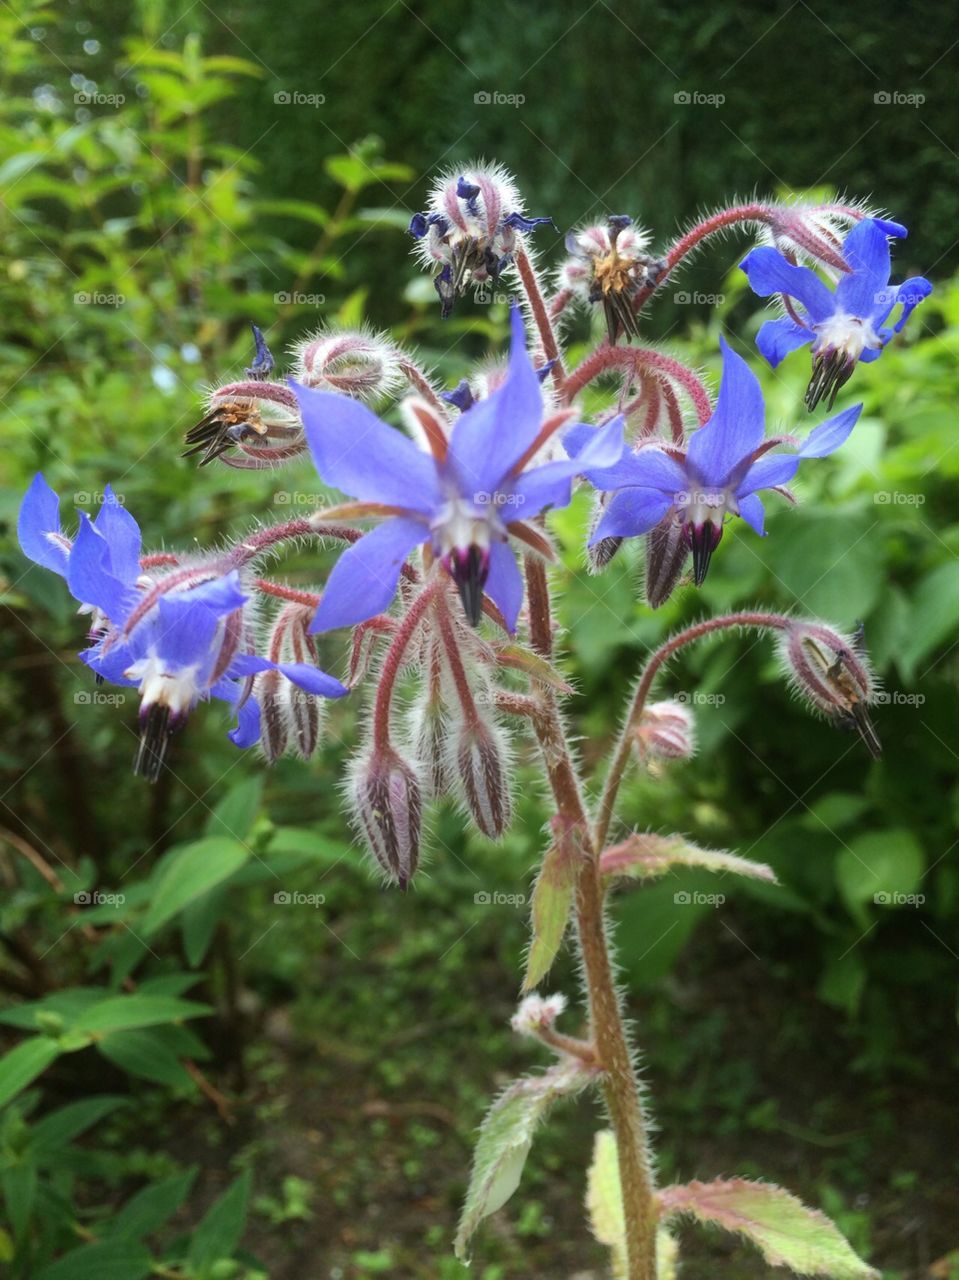 Beautiful borage with its tall sturdy fuzzy stems topped with delicate blue flowers.